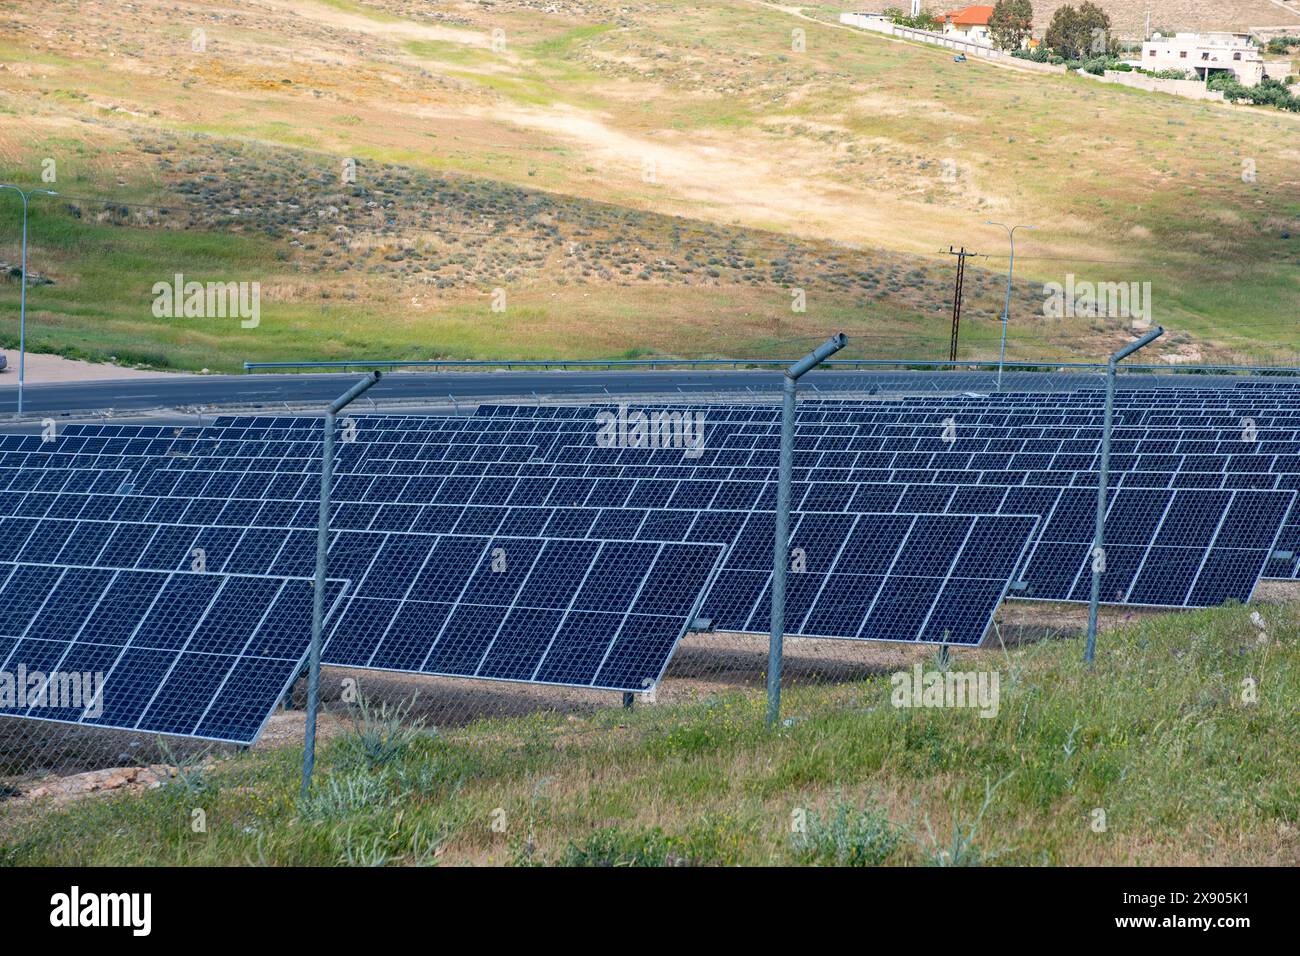 A vast array of solar panels is situated near a highway, harnessing solar energy in a rural landscape, with rolling hills and sparse buildings in the Stock Photo